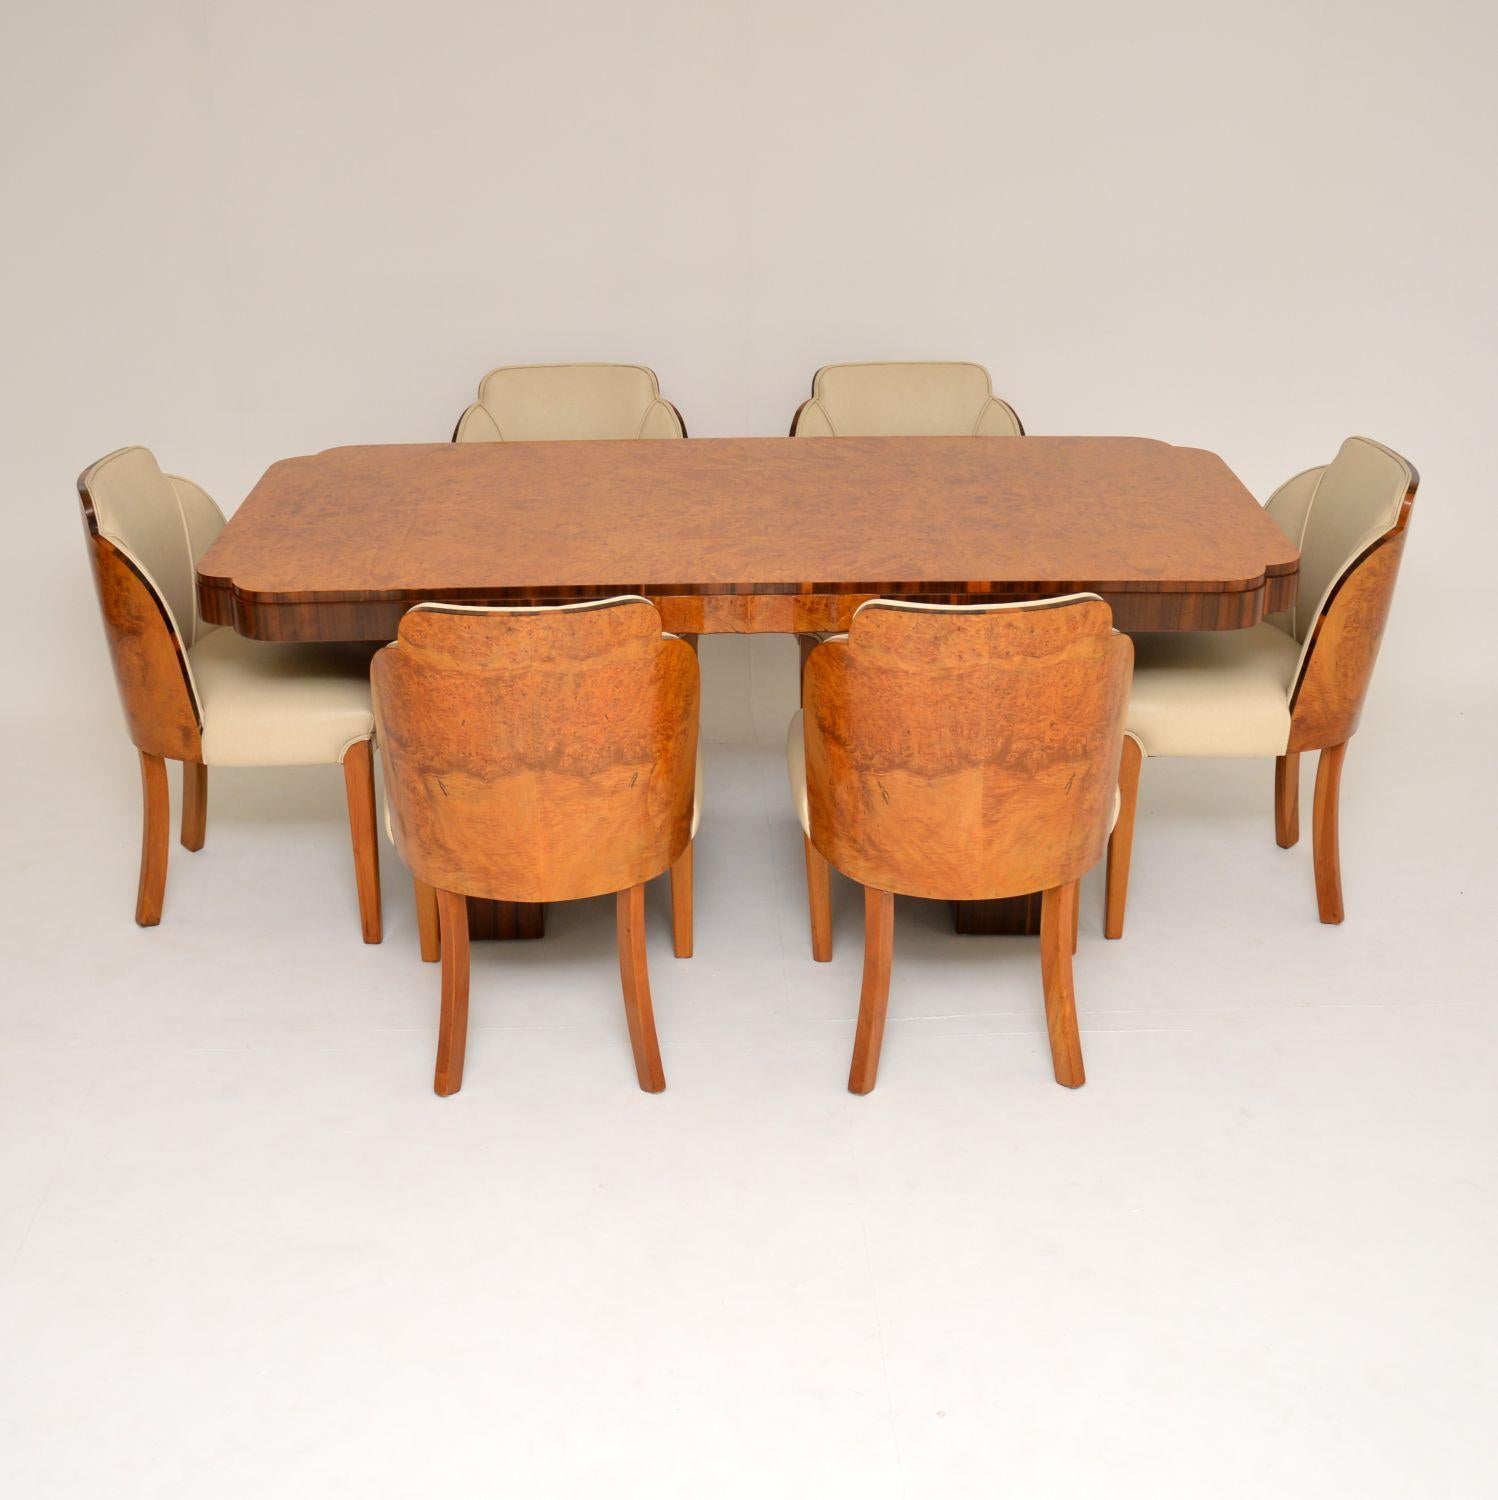 A stunning original Art Deco period walnut dining suite by Epstein. This consists of six amazing cloud back dining chairs, and a twin pedestal dining table.

The quality is absolutely outstanding, and this has a strikingly beautiful design. It is